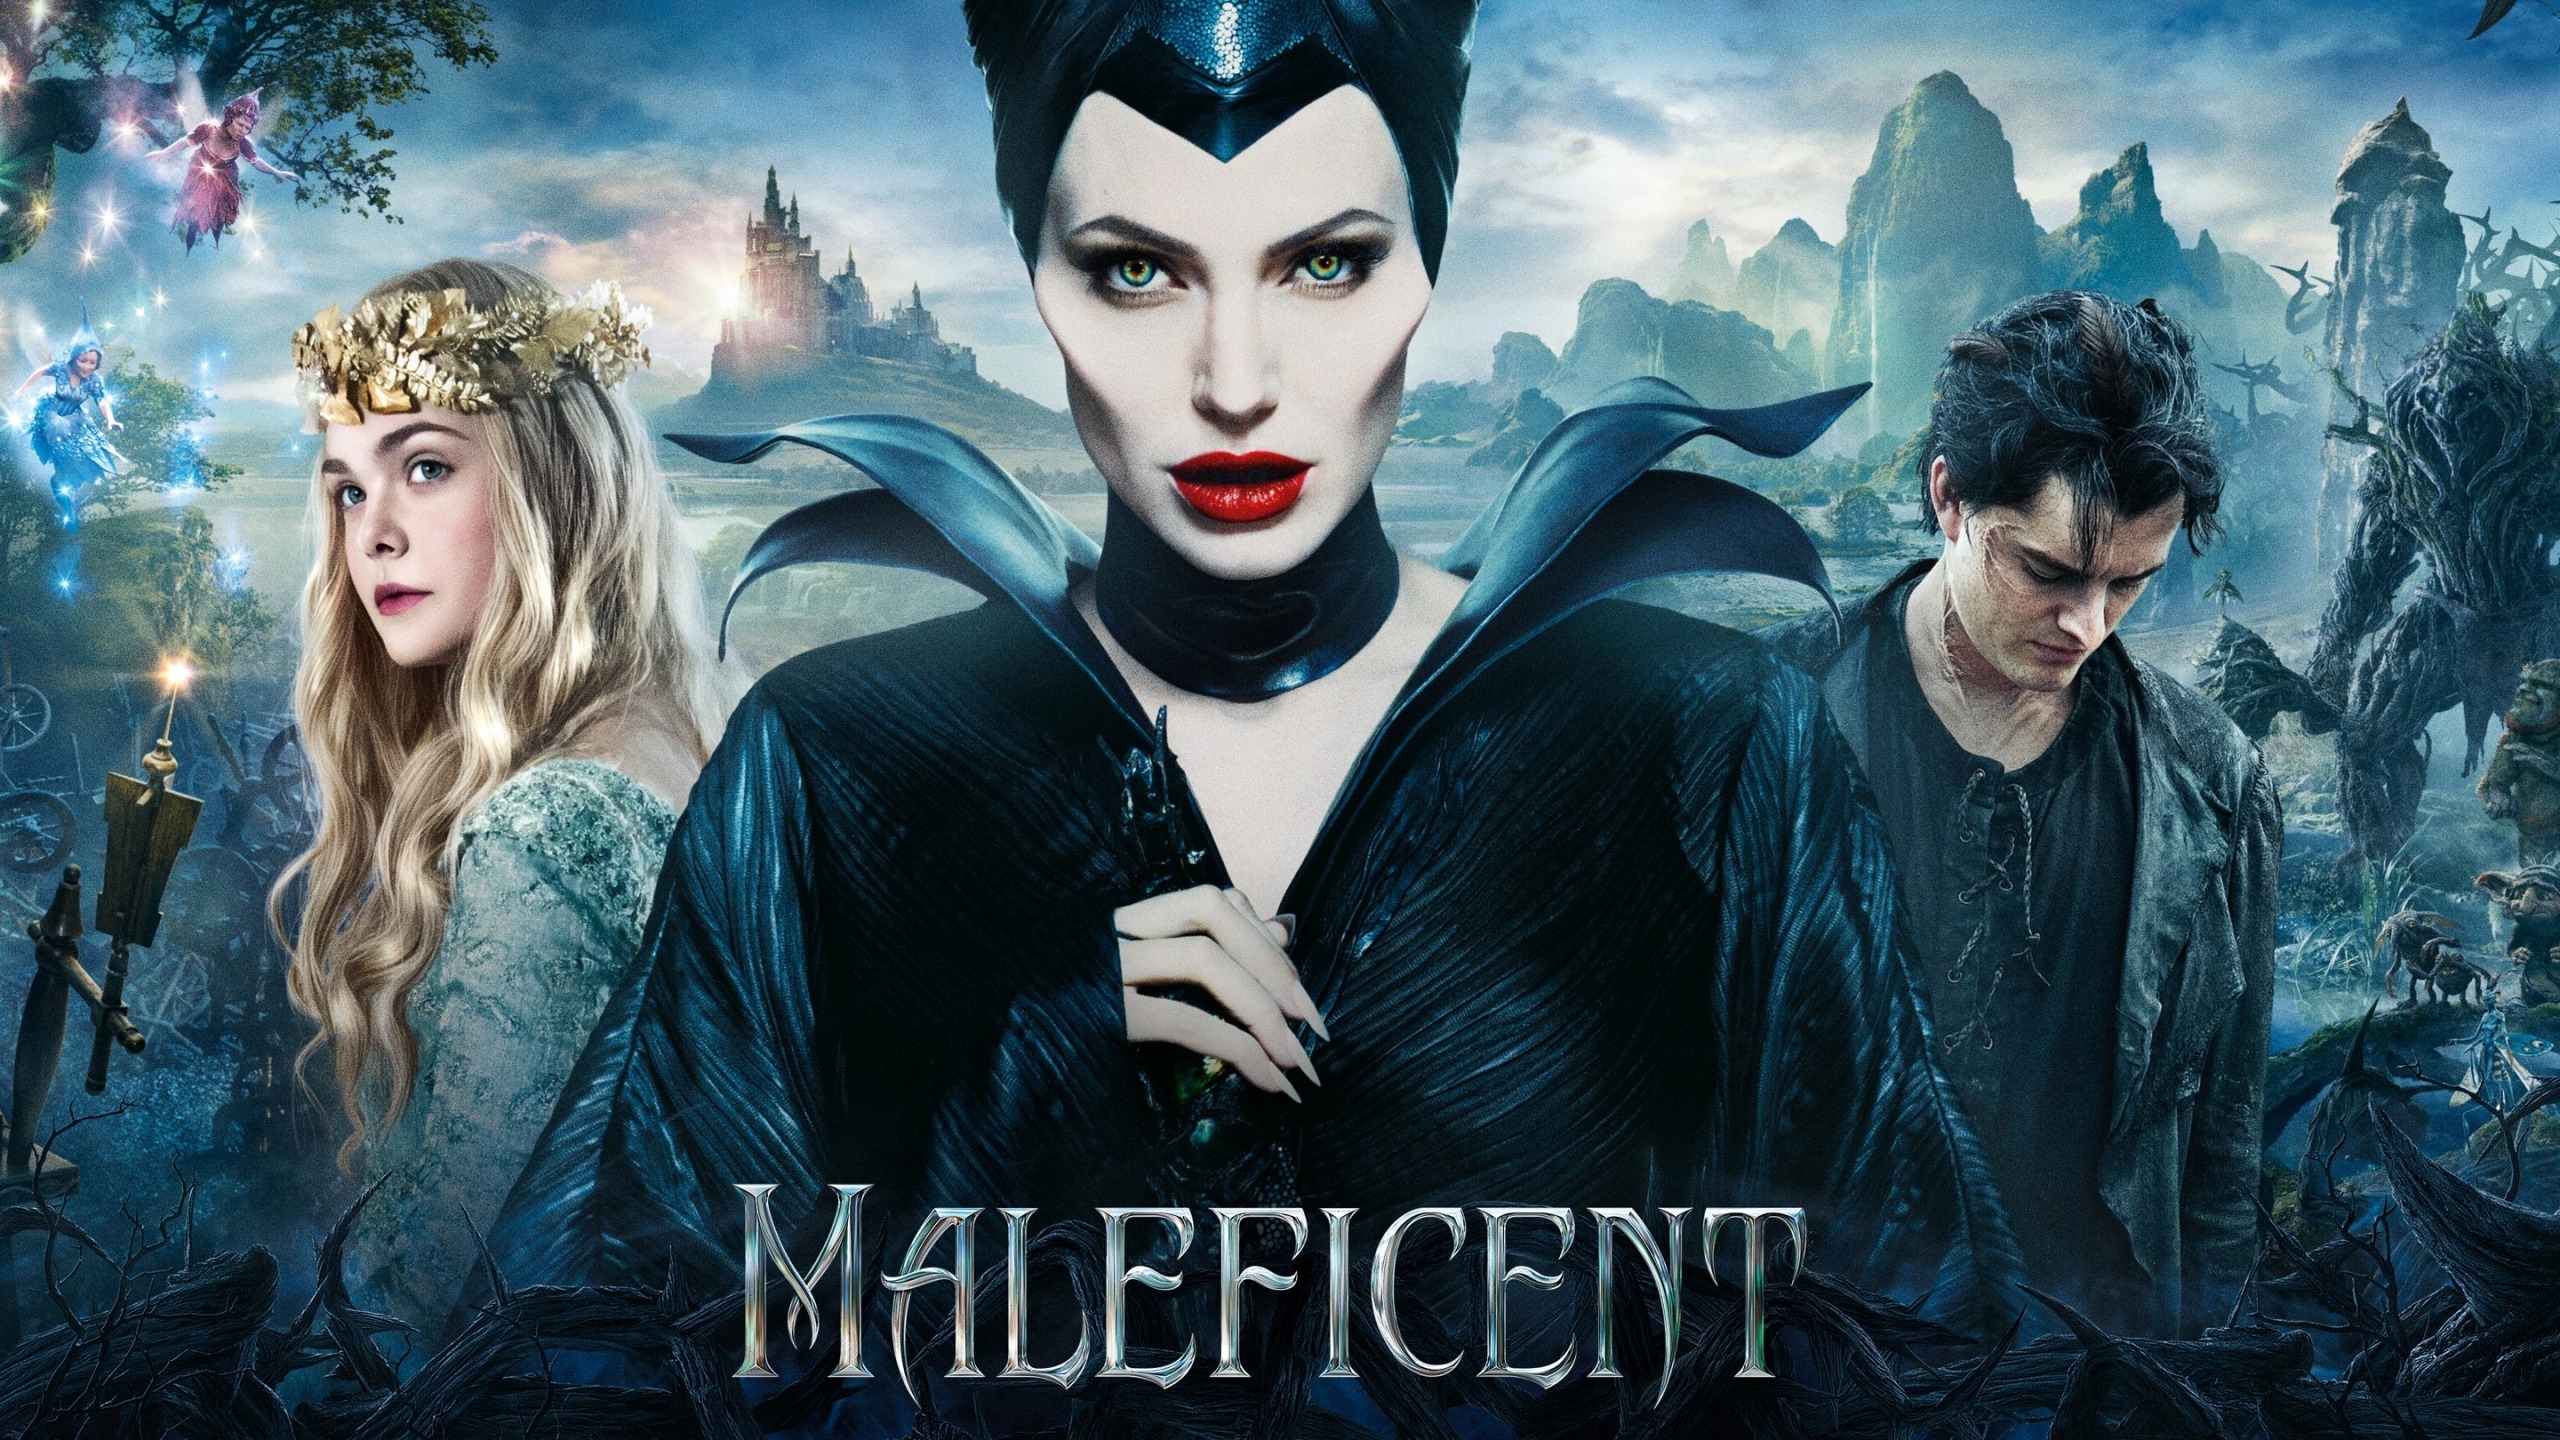 Maleficent Poster for 2560x1440 HDTV resolution